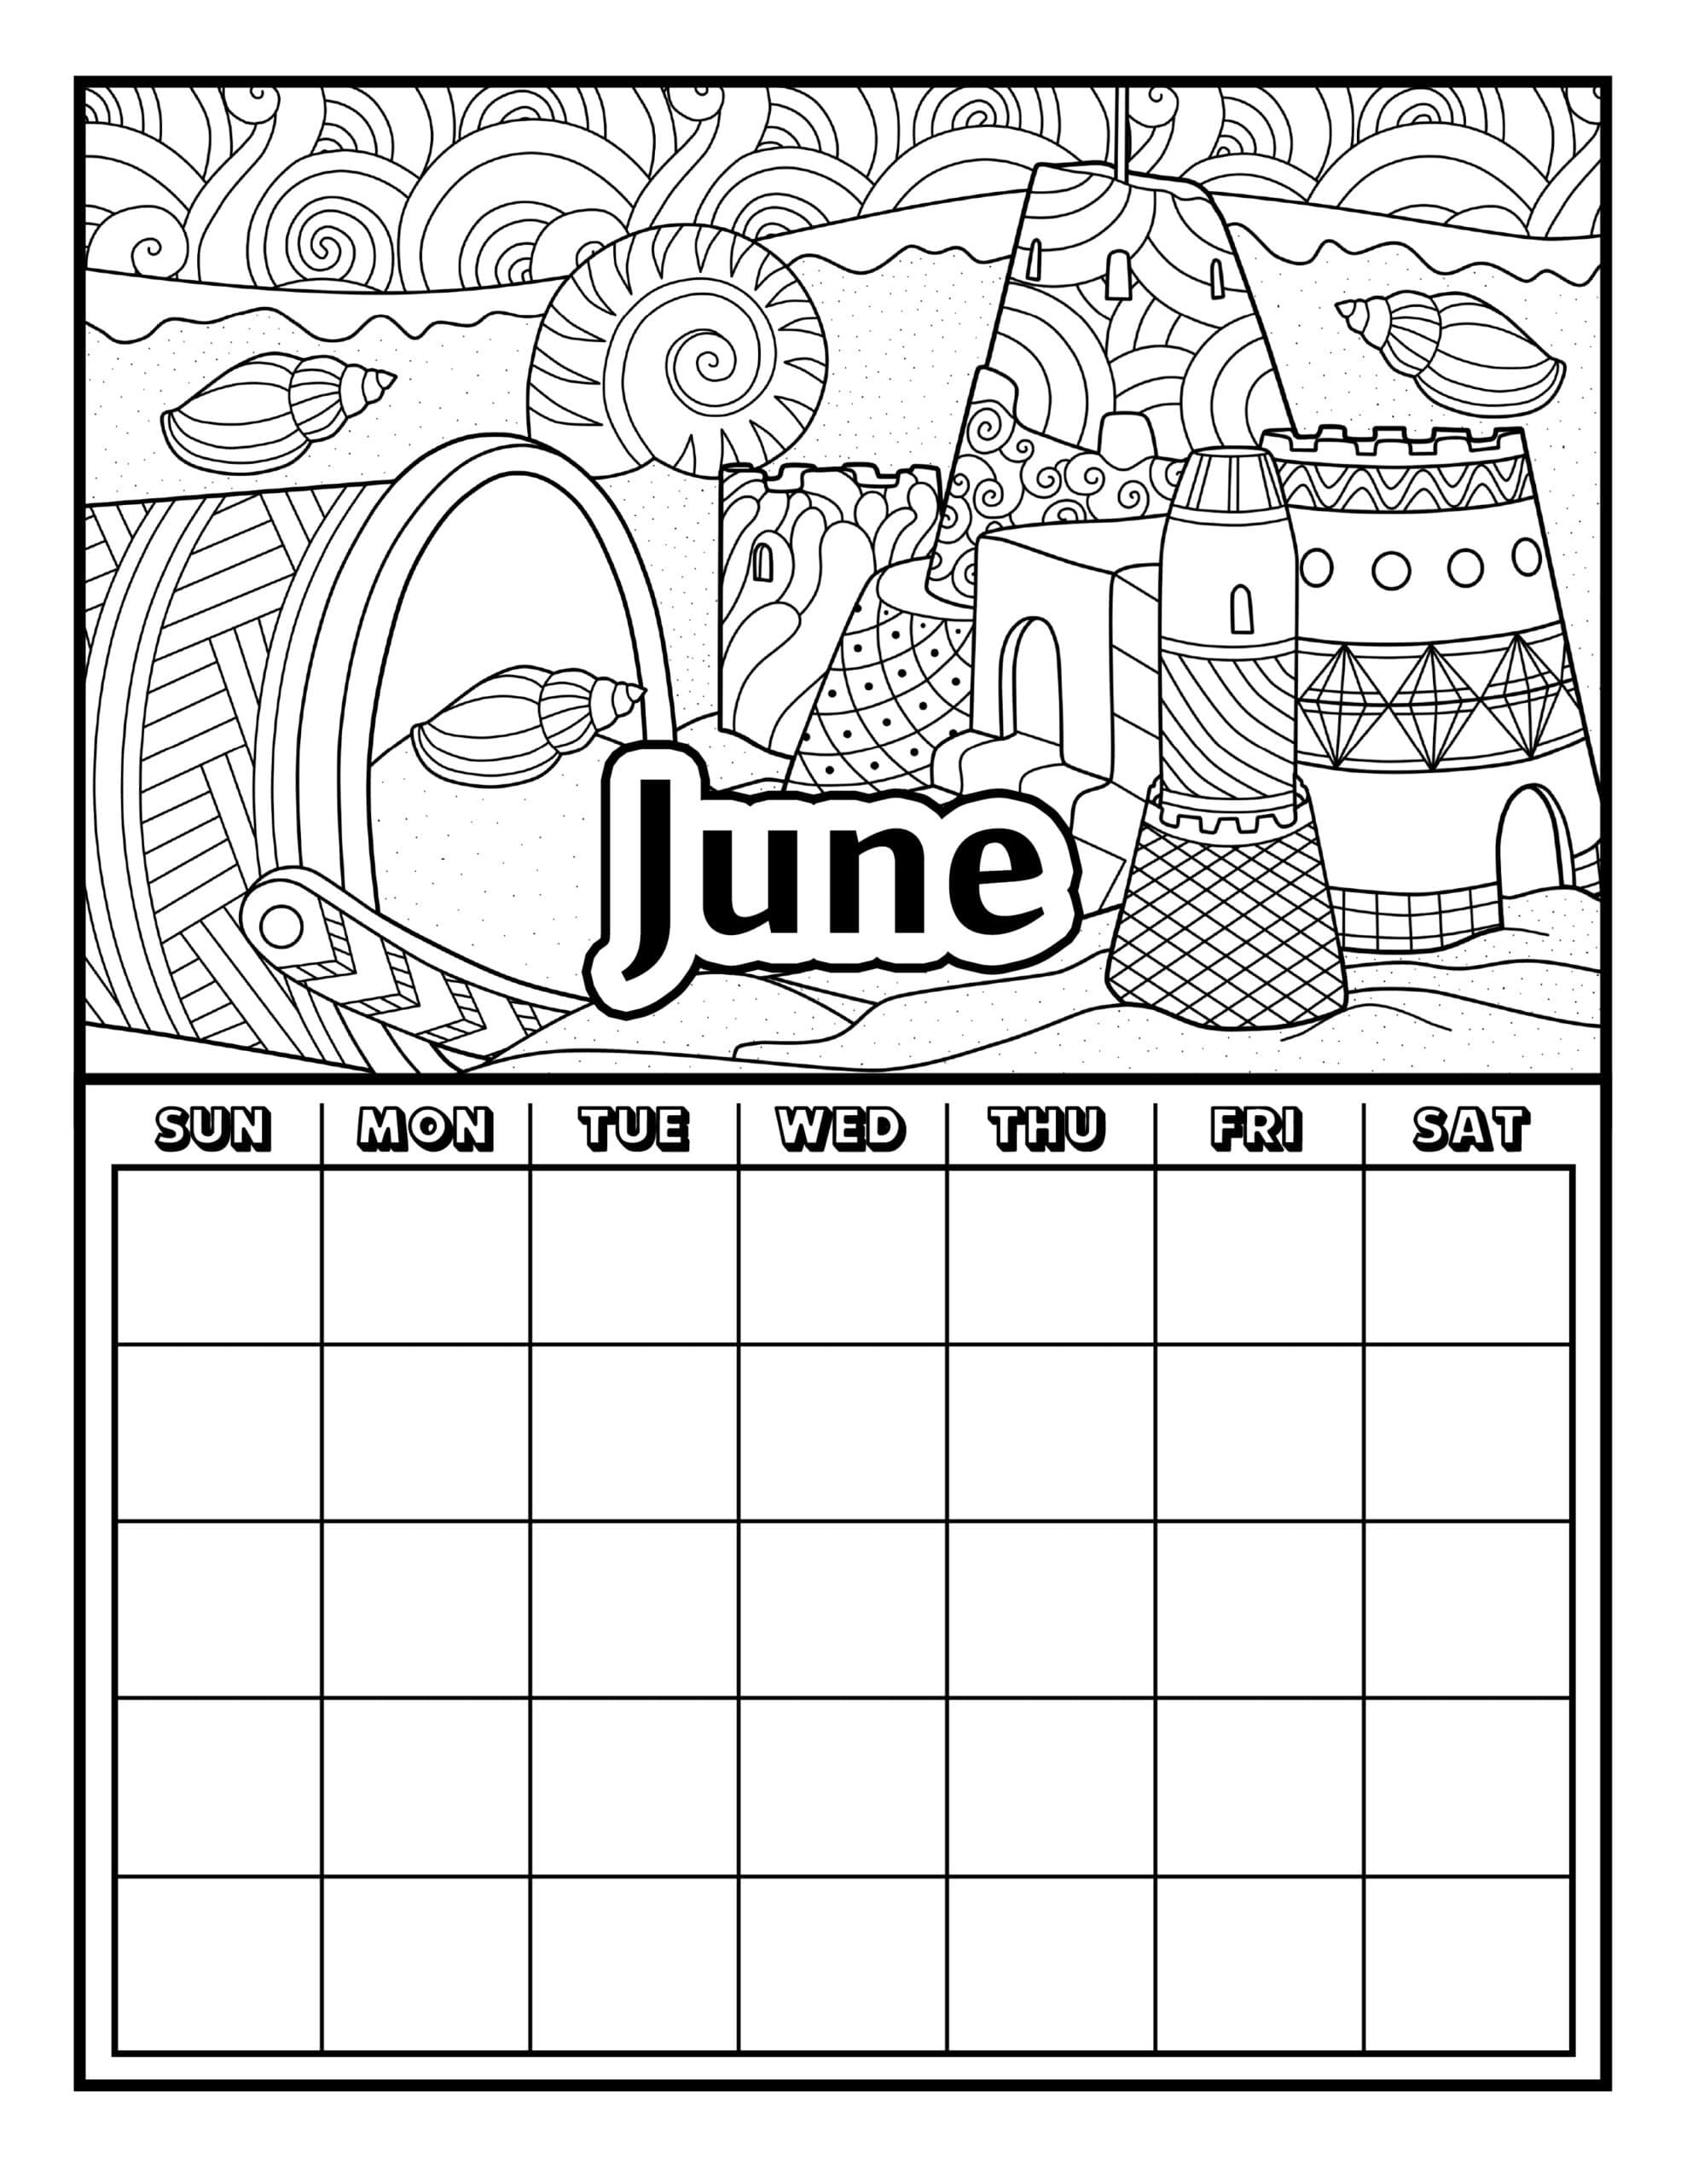 Coloring pages june